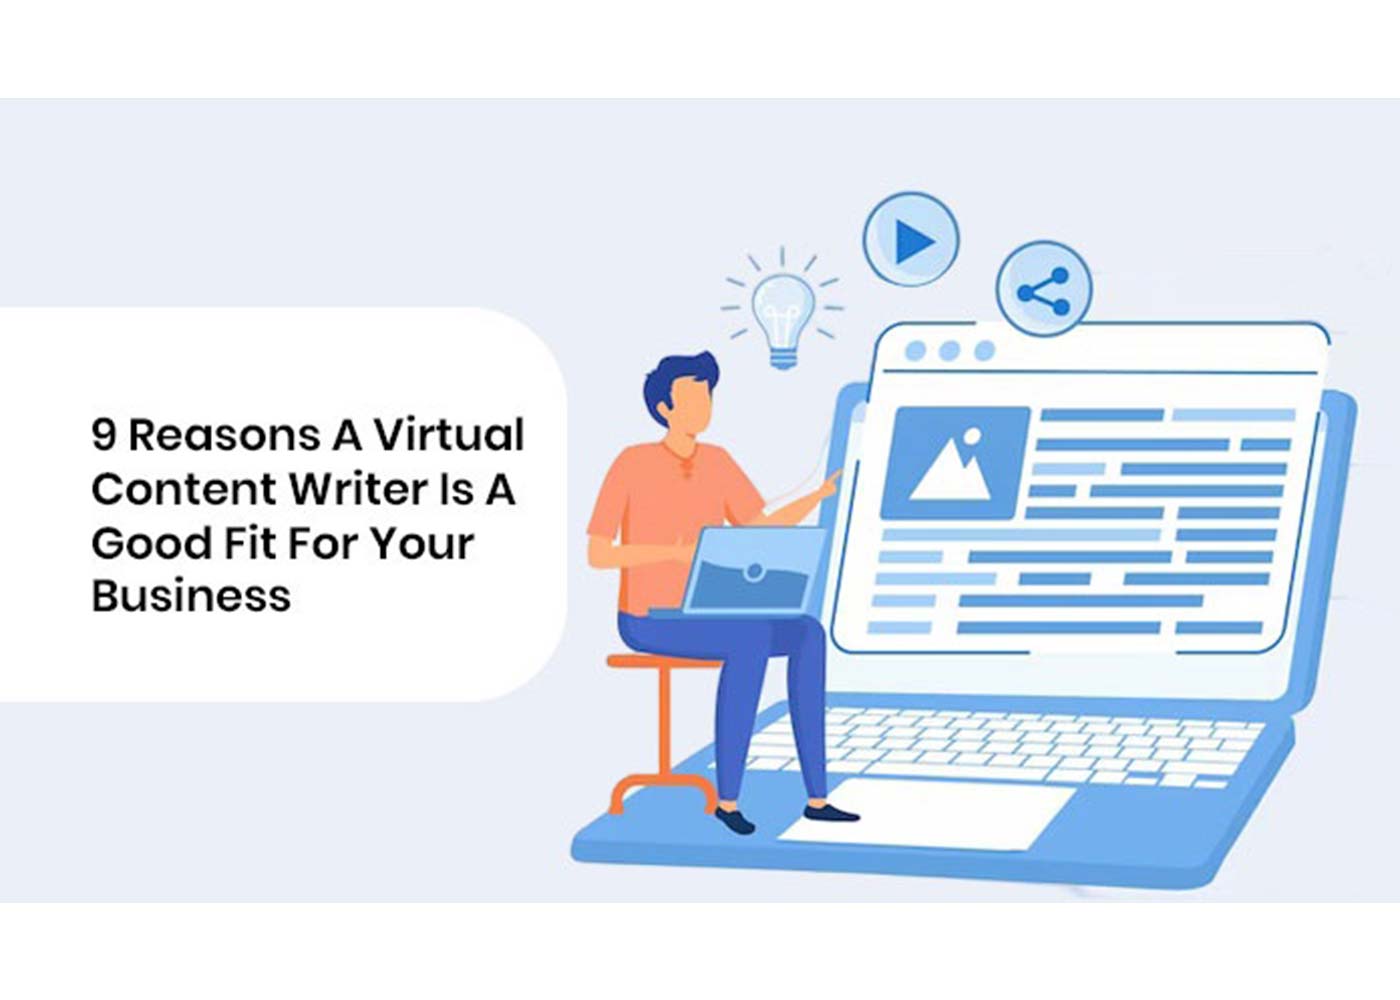 9 Reasons a Virtual Content Writer Is a Good Fit for Your Business